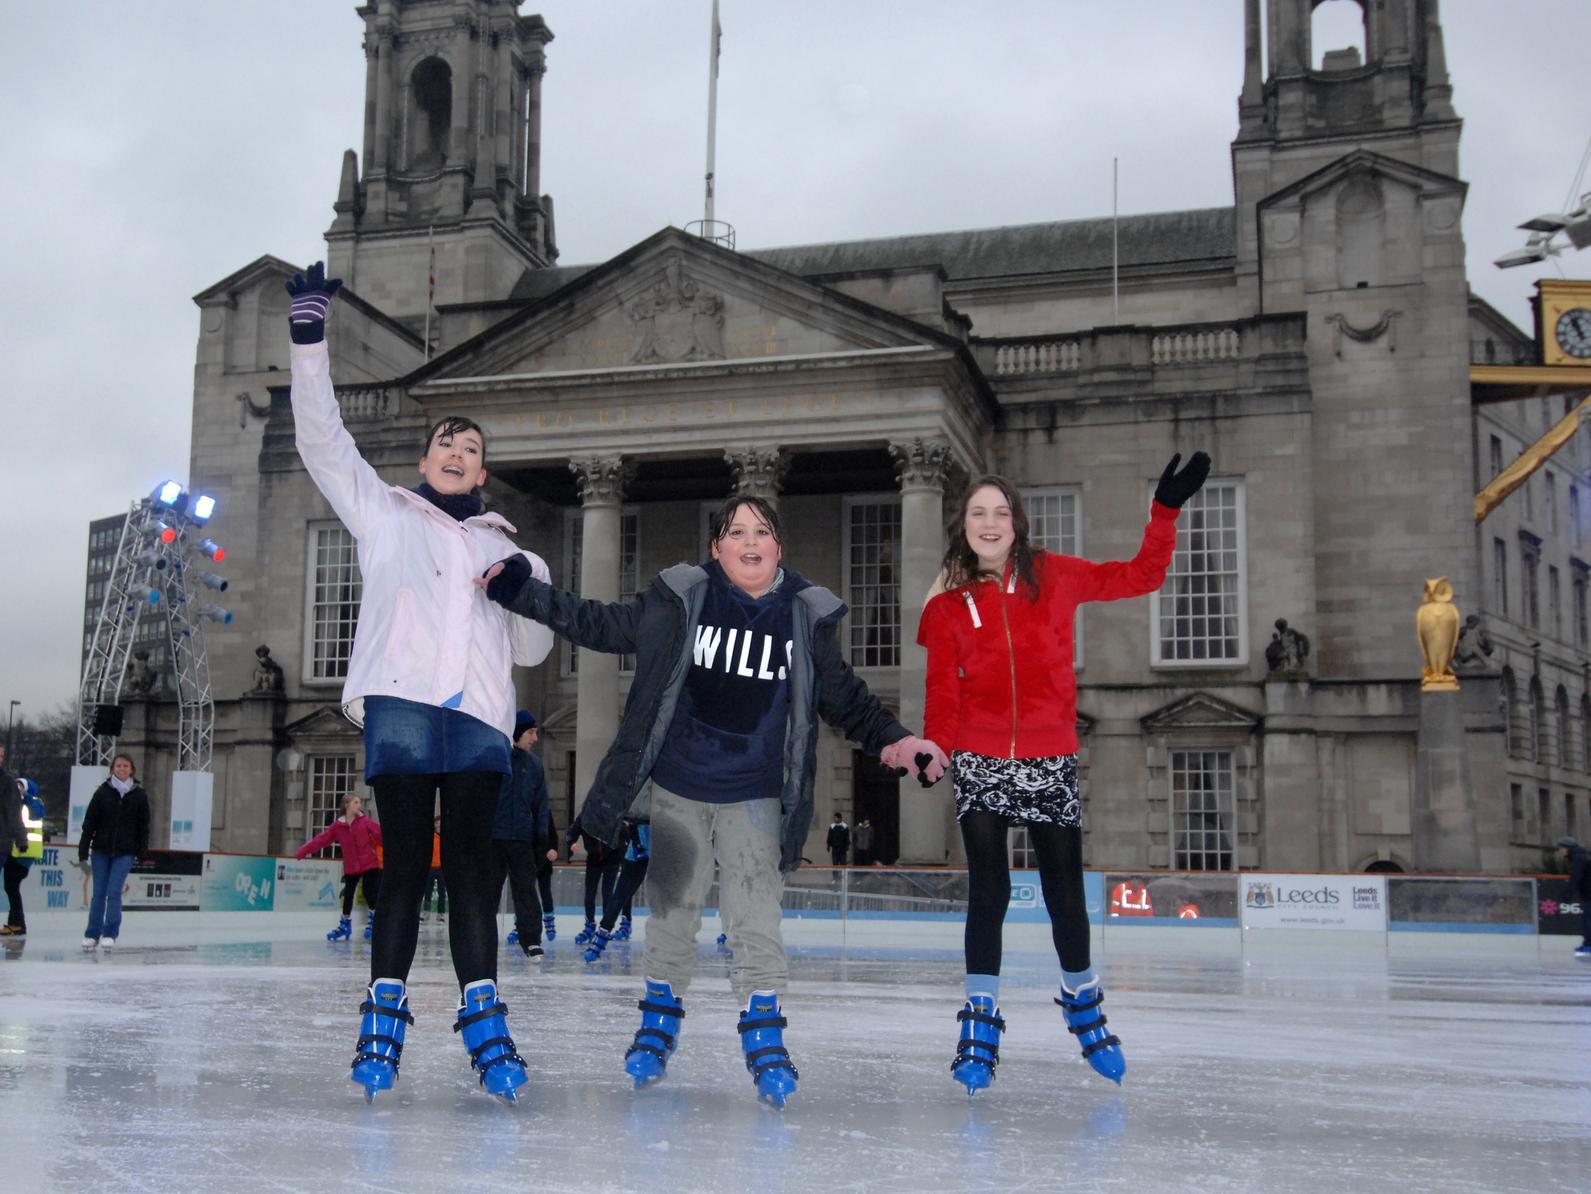 Young skaters Joanna Barnett, Jessica Guy and Keshyn Squires give our snapper a wave on the ice.